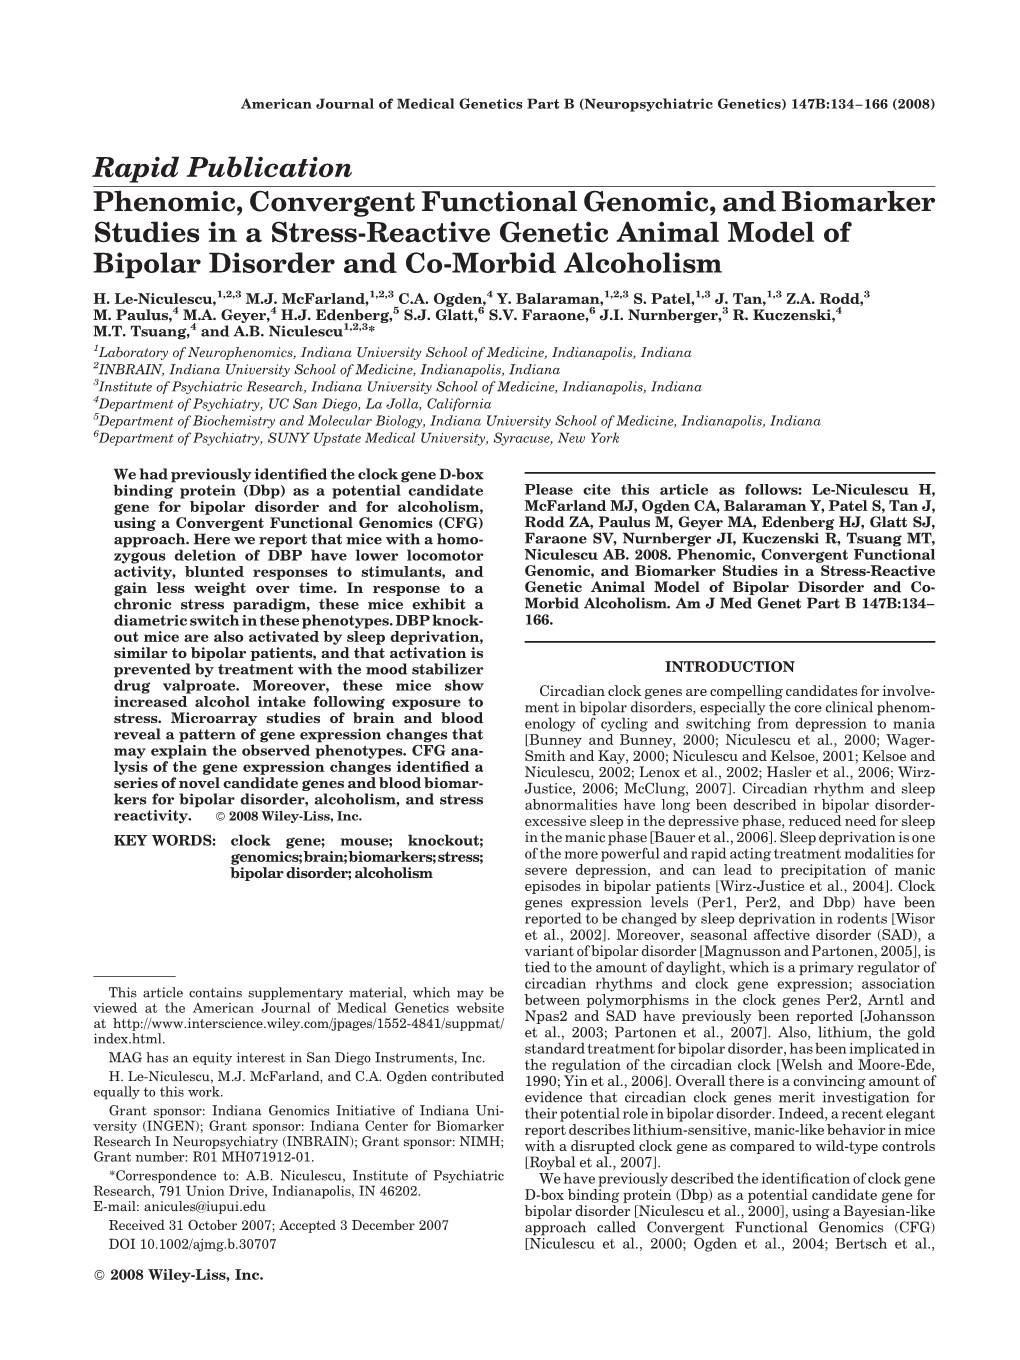 Phenomic, Convergent Functional Genomic, and Biomarker Studies in a Stress-Reactive Genetic Animal Model of Bipolar Disorder and Co-Morbid Alcoholism H